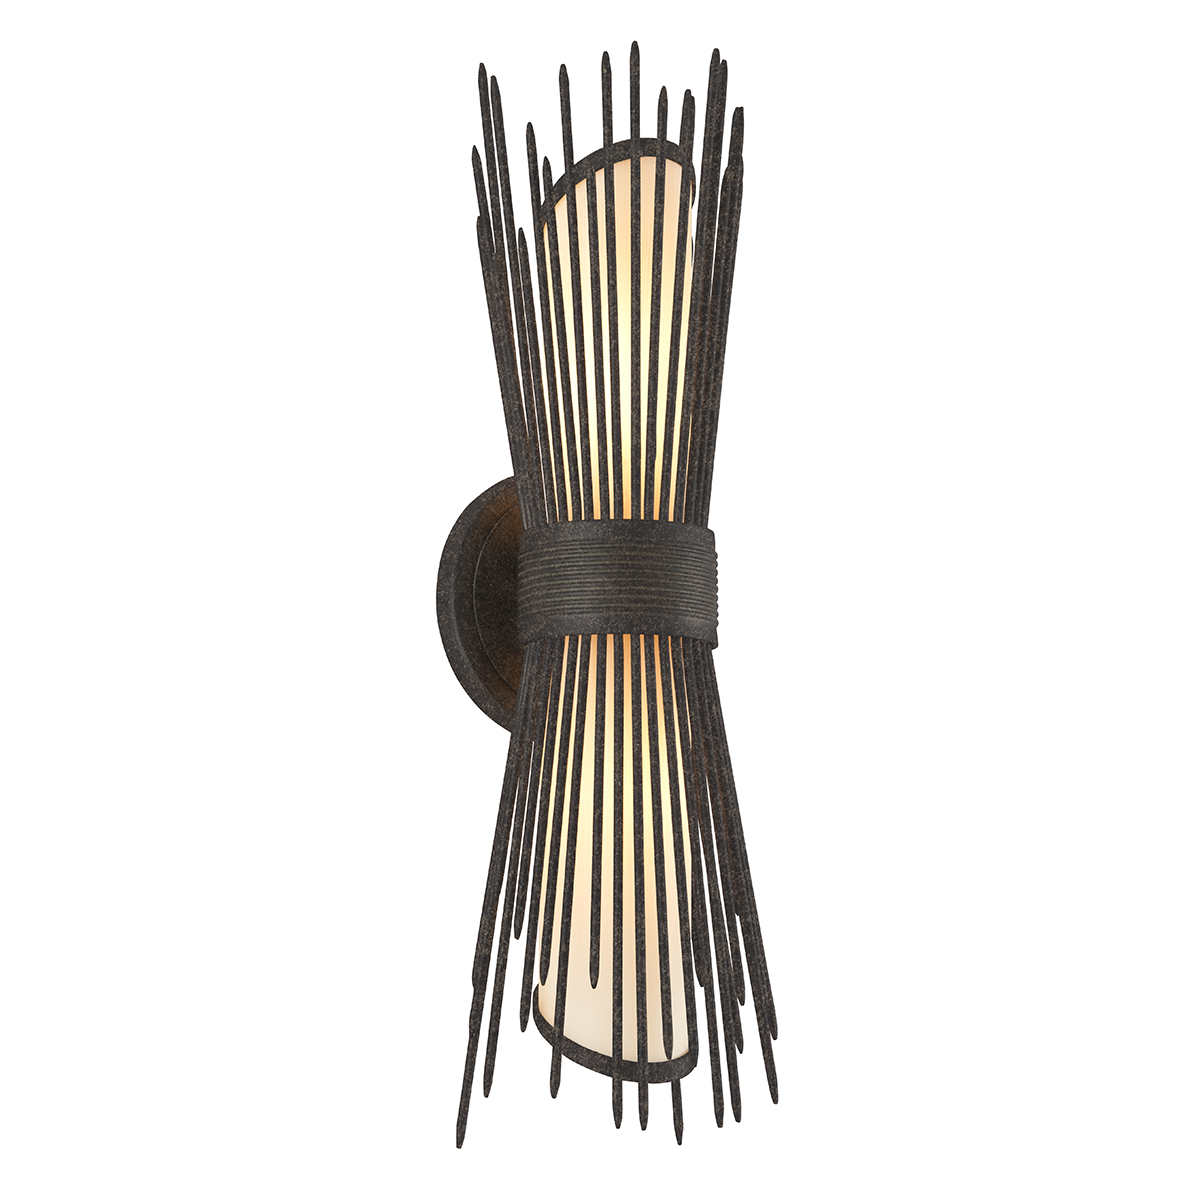 Troy Lighting Blink Wall Sconce Wall Sconce Troy Lighting FRENCH IRON 6.25x6.25x20.75 